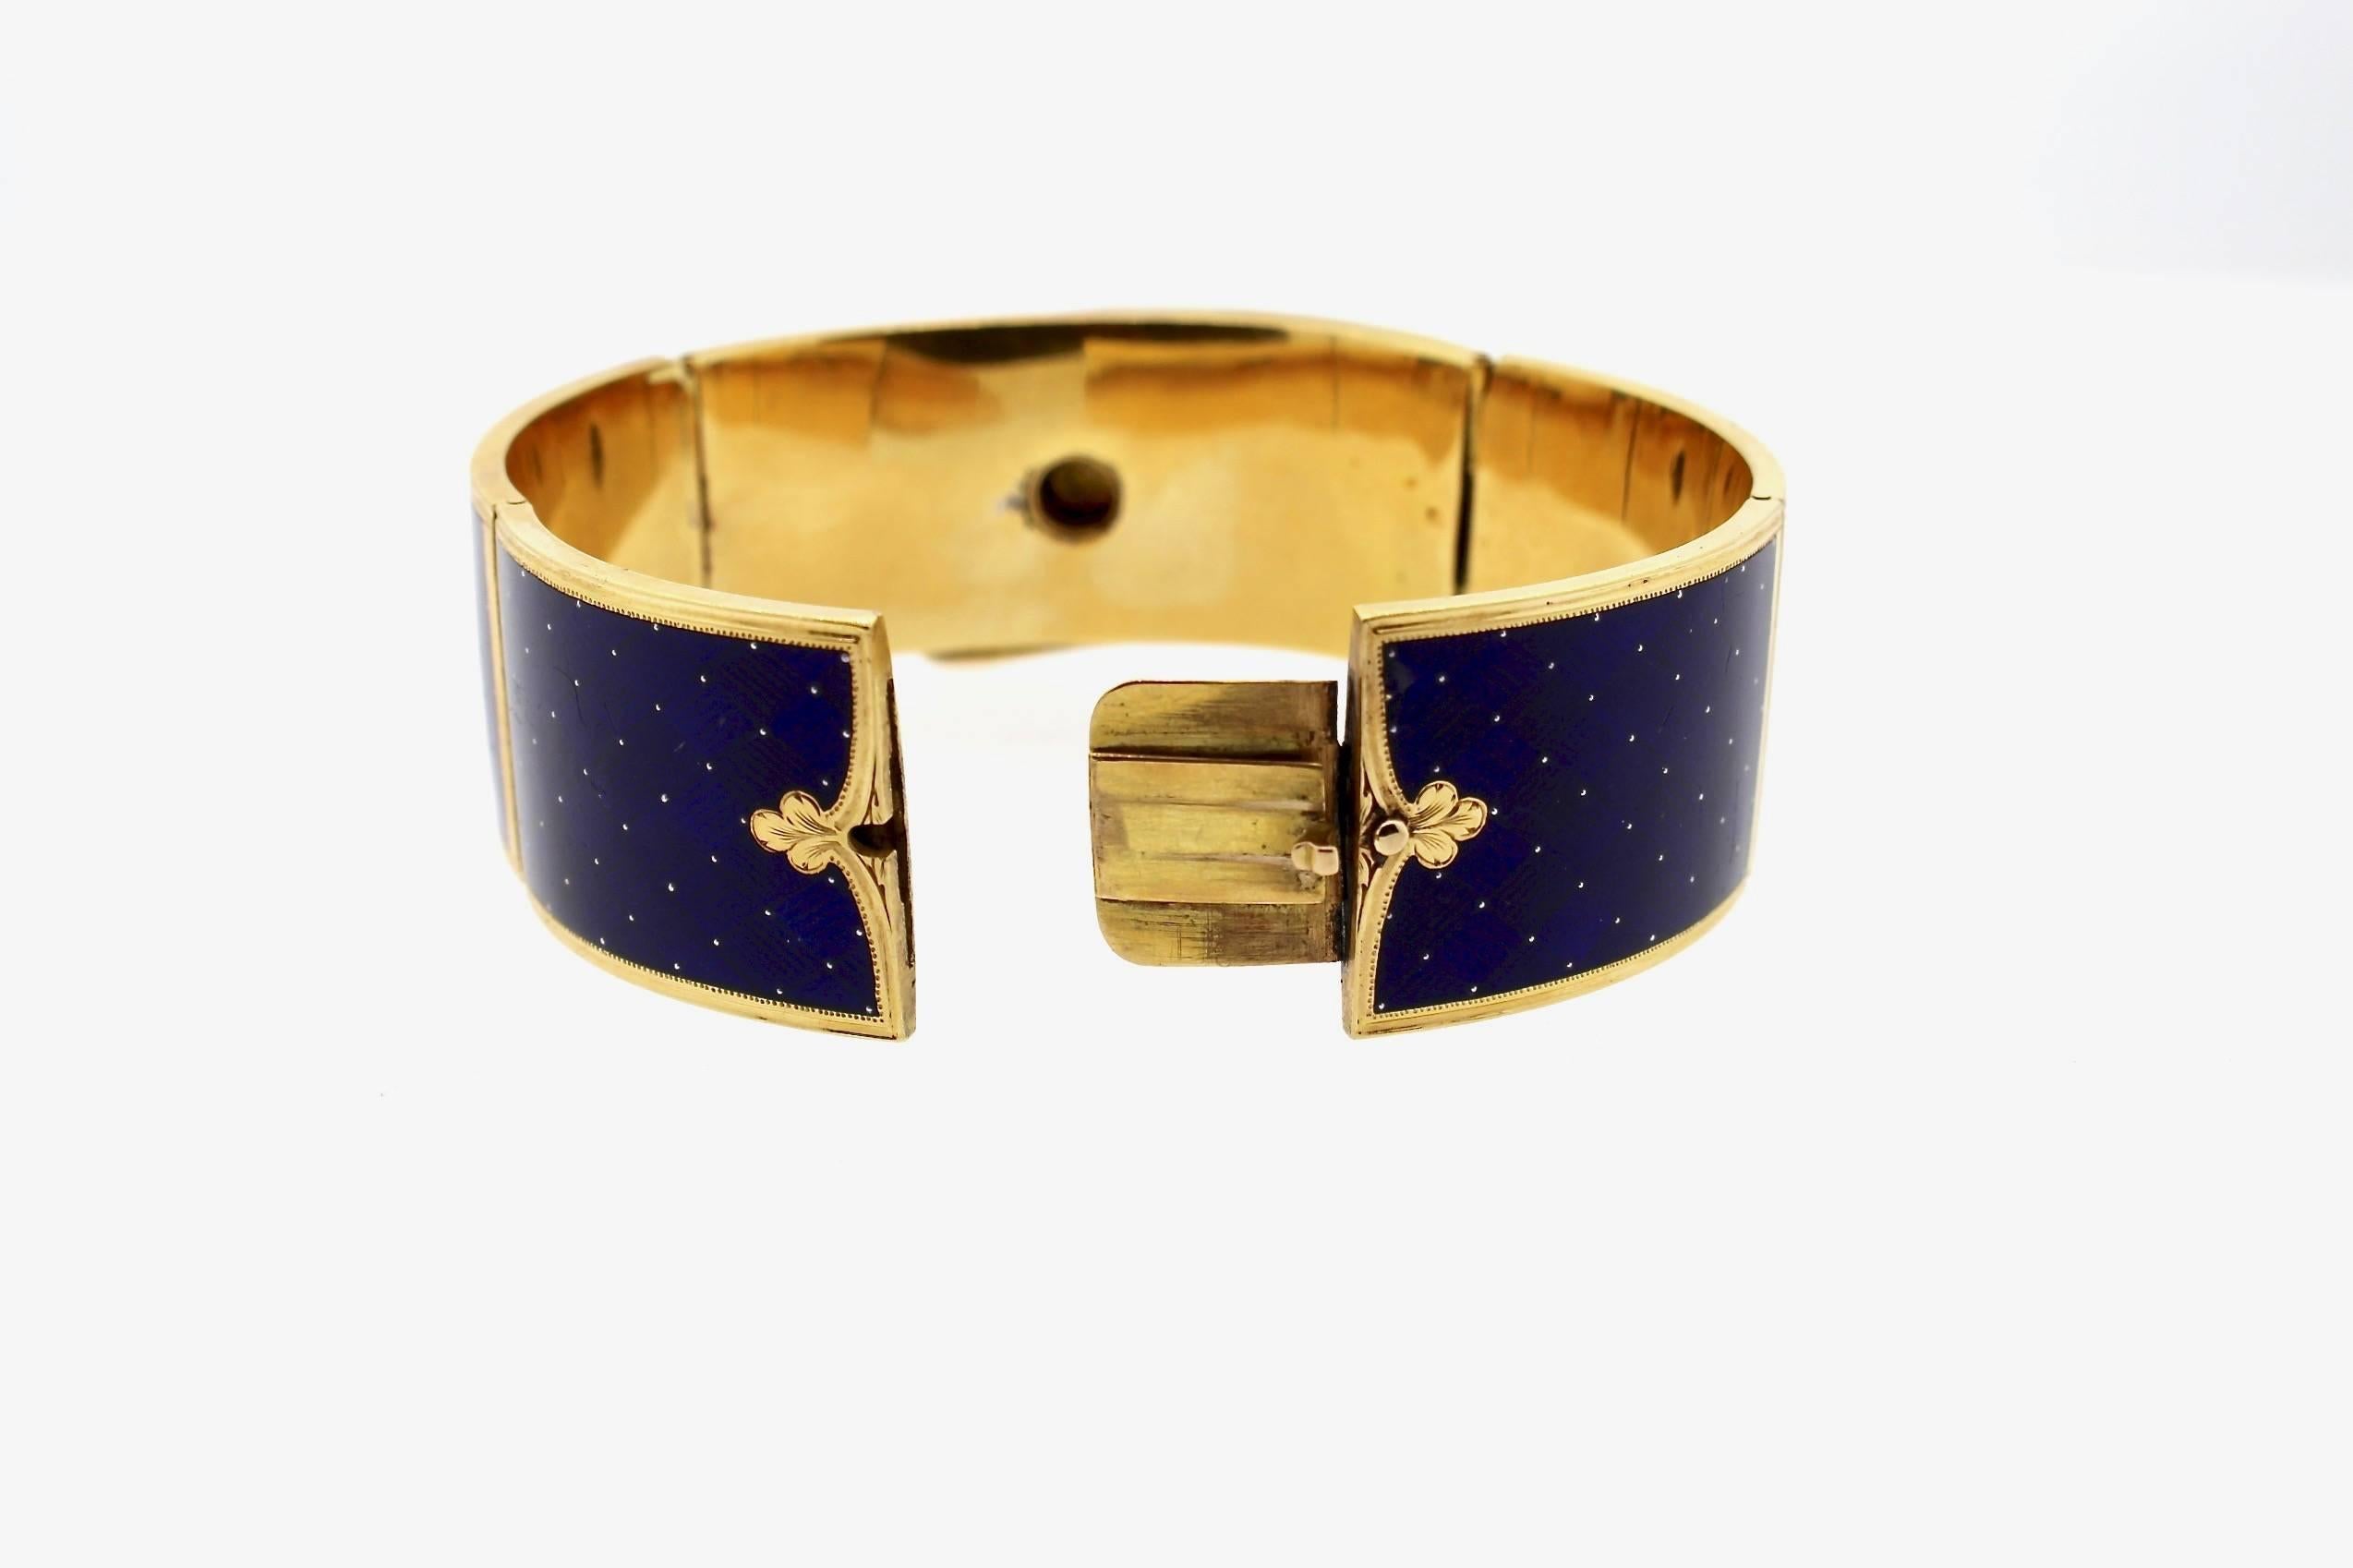 This brilliant blue guilloché enamel bracelet is a work of art. Guilloché comes from the French verb meaning 